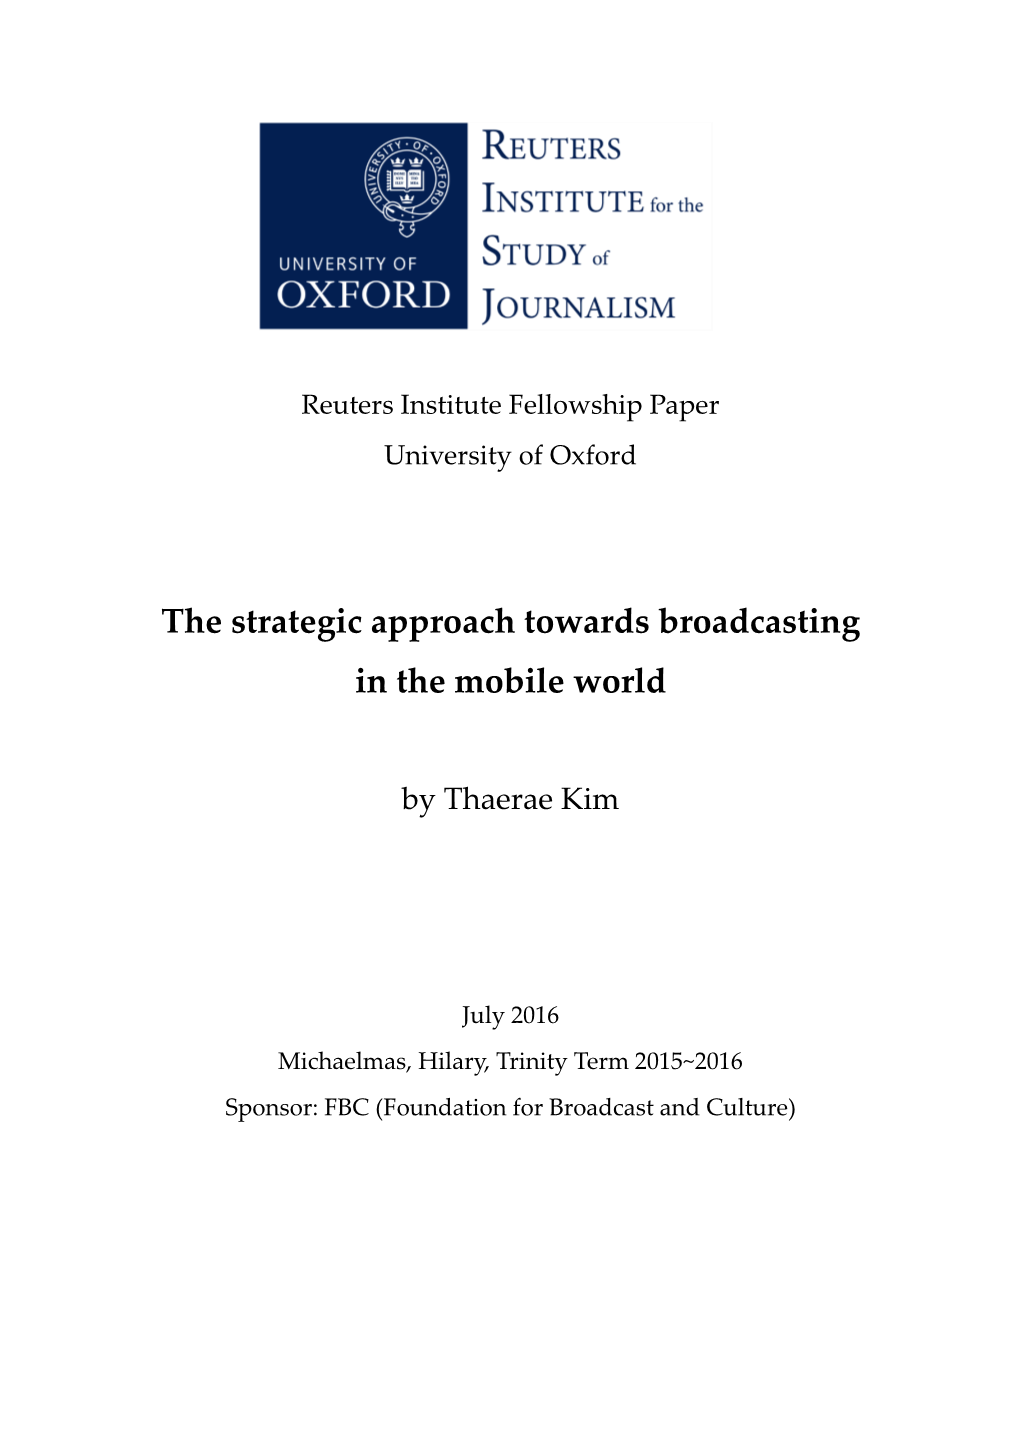 The Strategic Approach Towards Broadcasting in the Mobile World